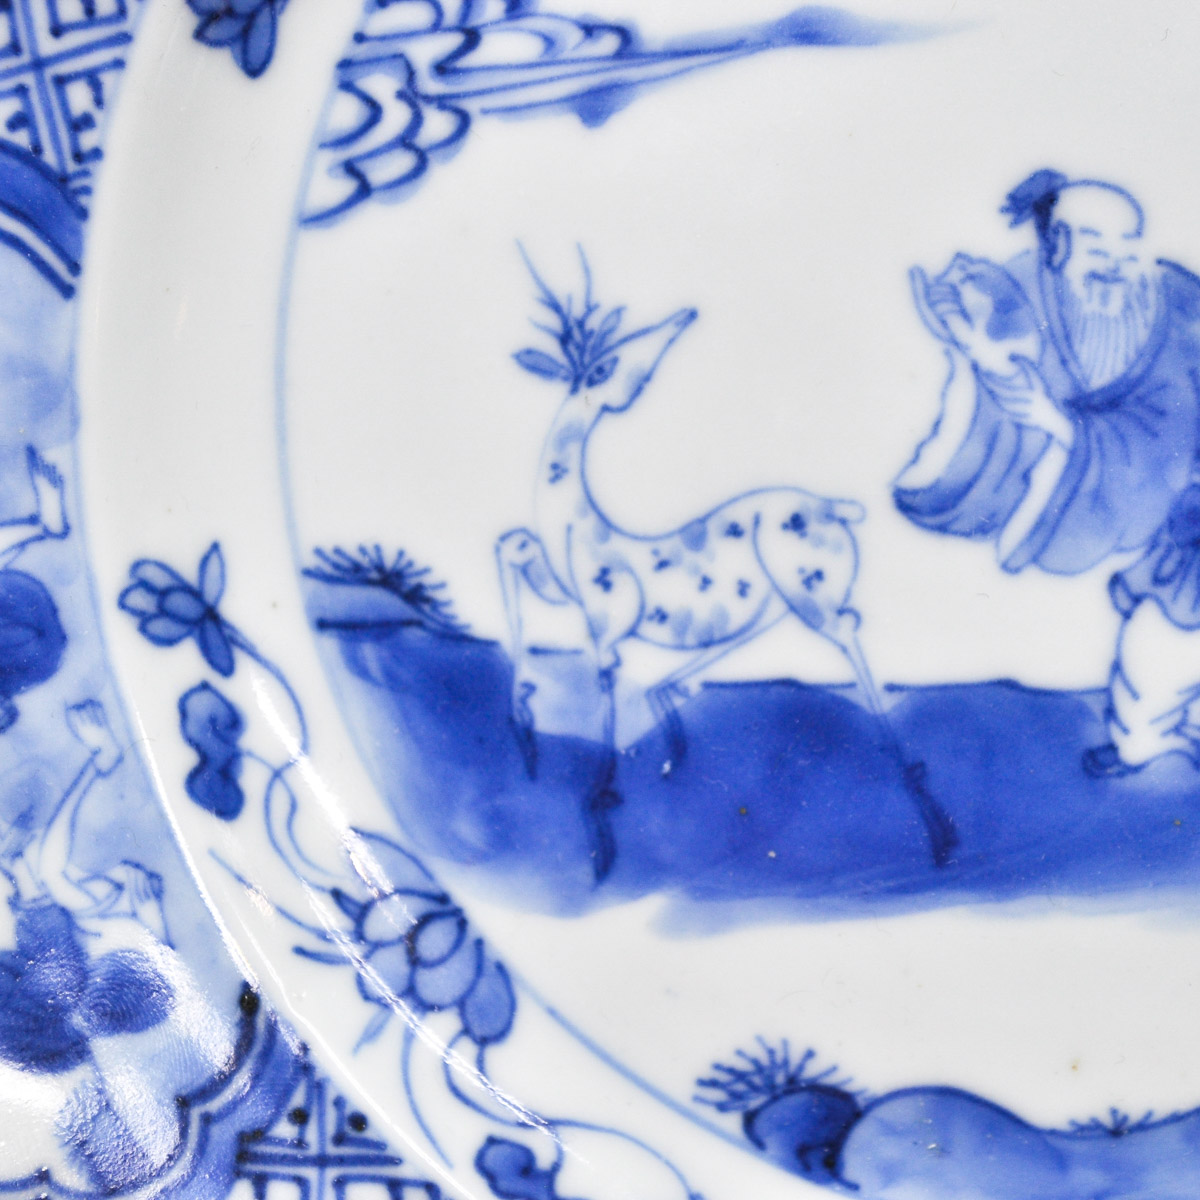 A Blue and White Decor Plate - Image 4 of 5